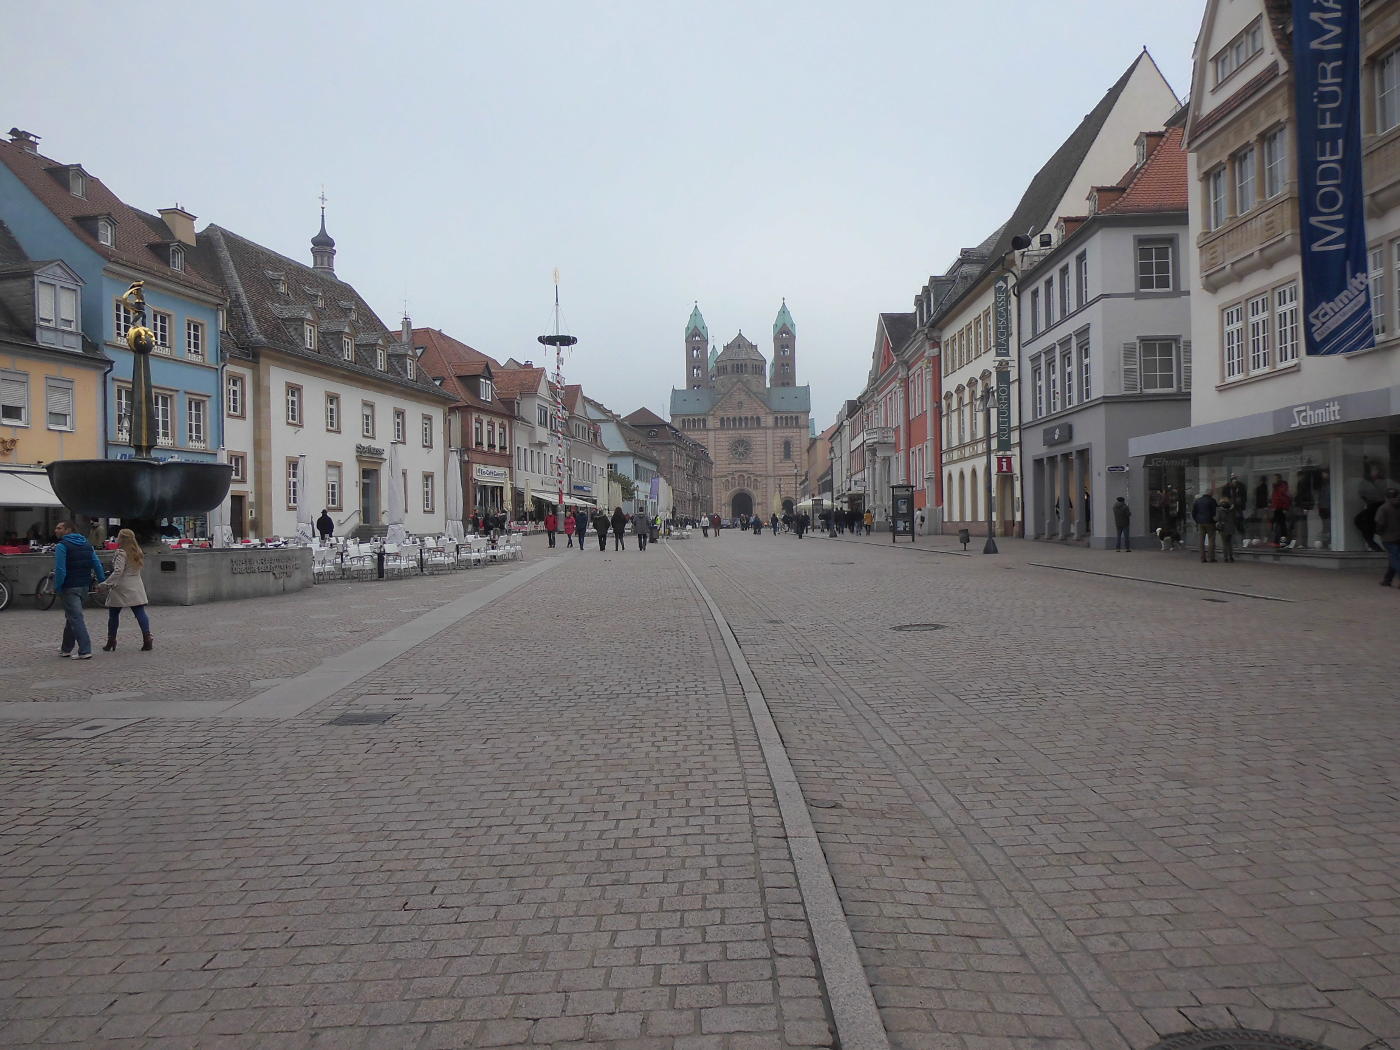 No Jehovah's Witnesses in Speyer on 01.11.2016